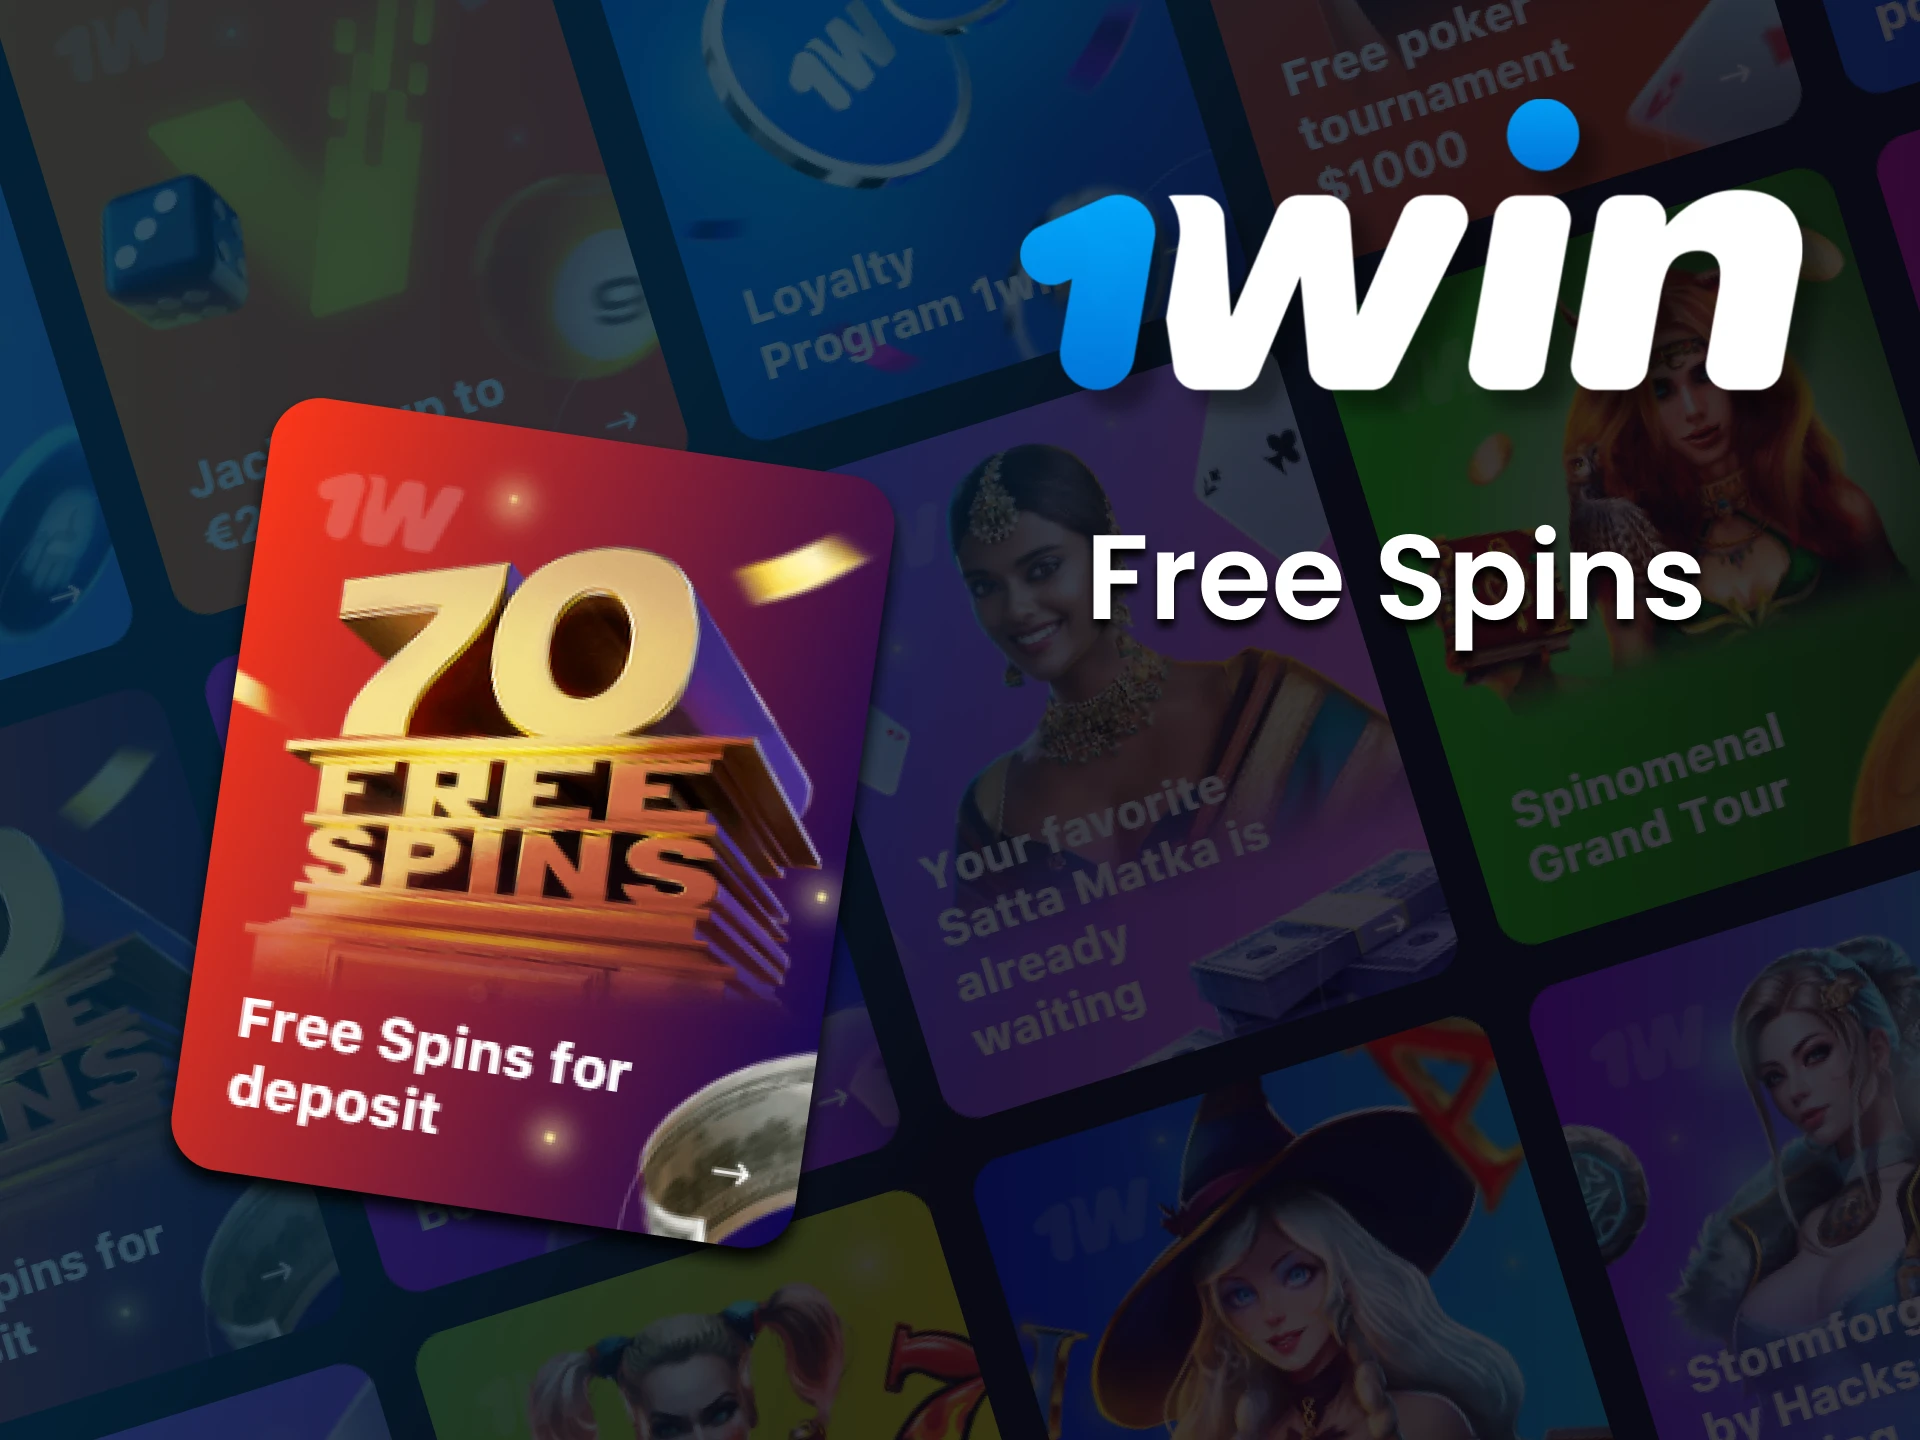 Get free spins for casino games at 1win.